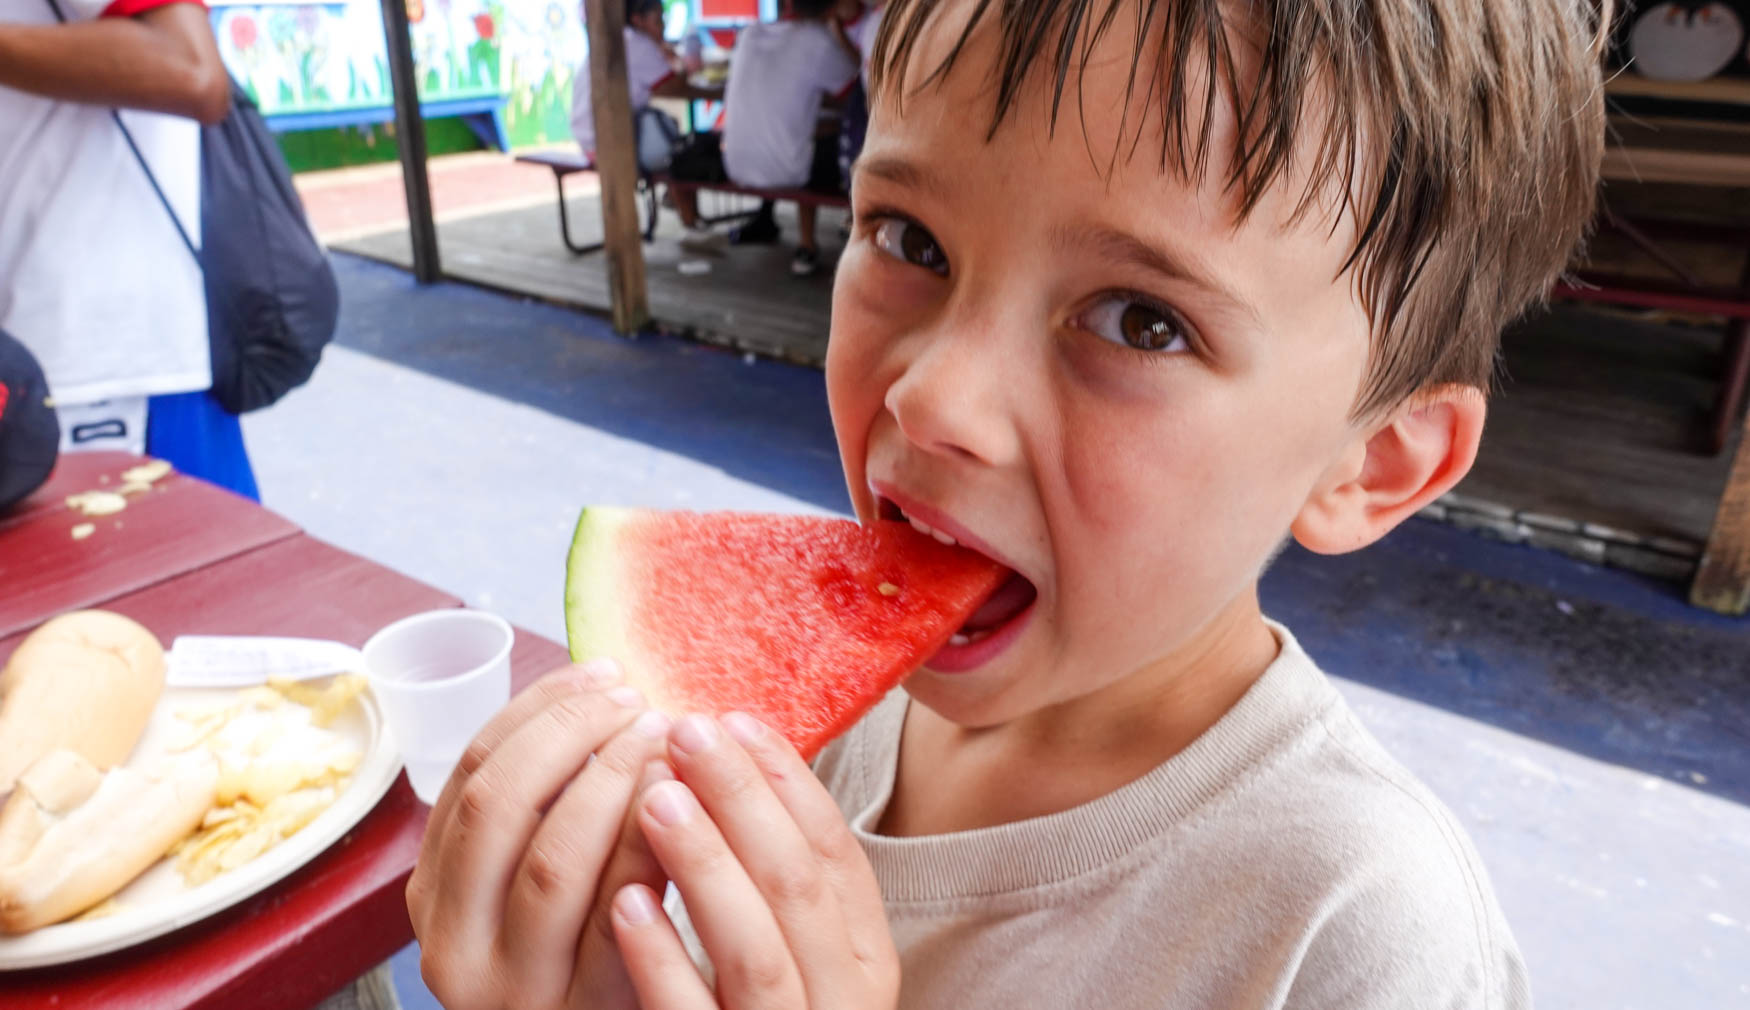 Camper eating a slice of watermelon.